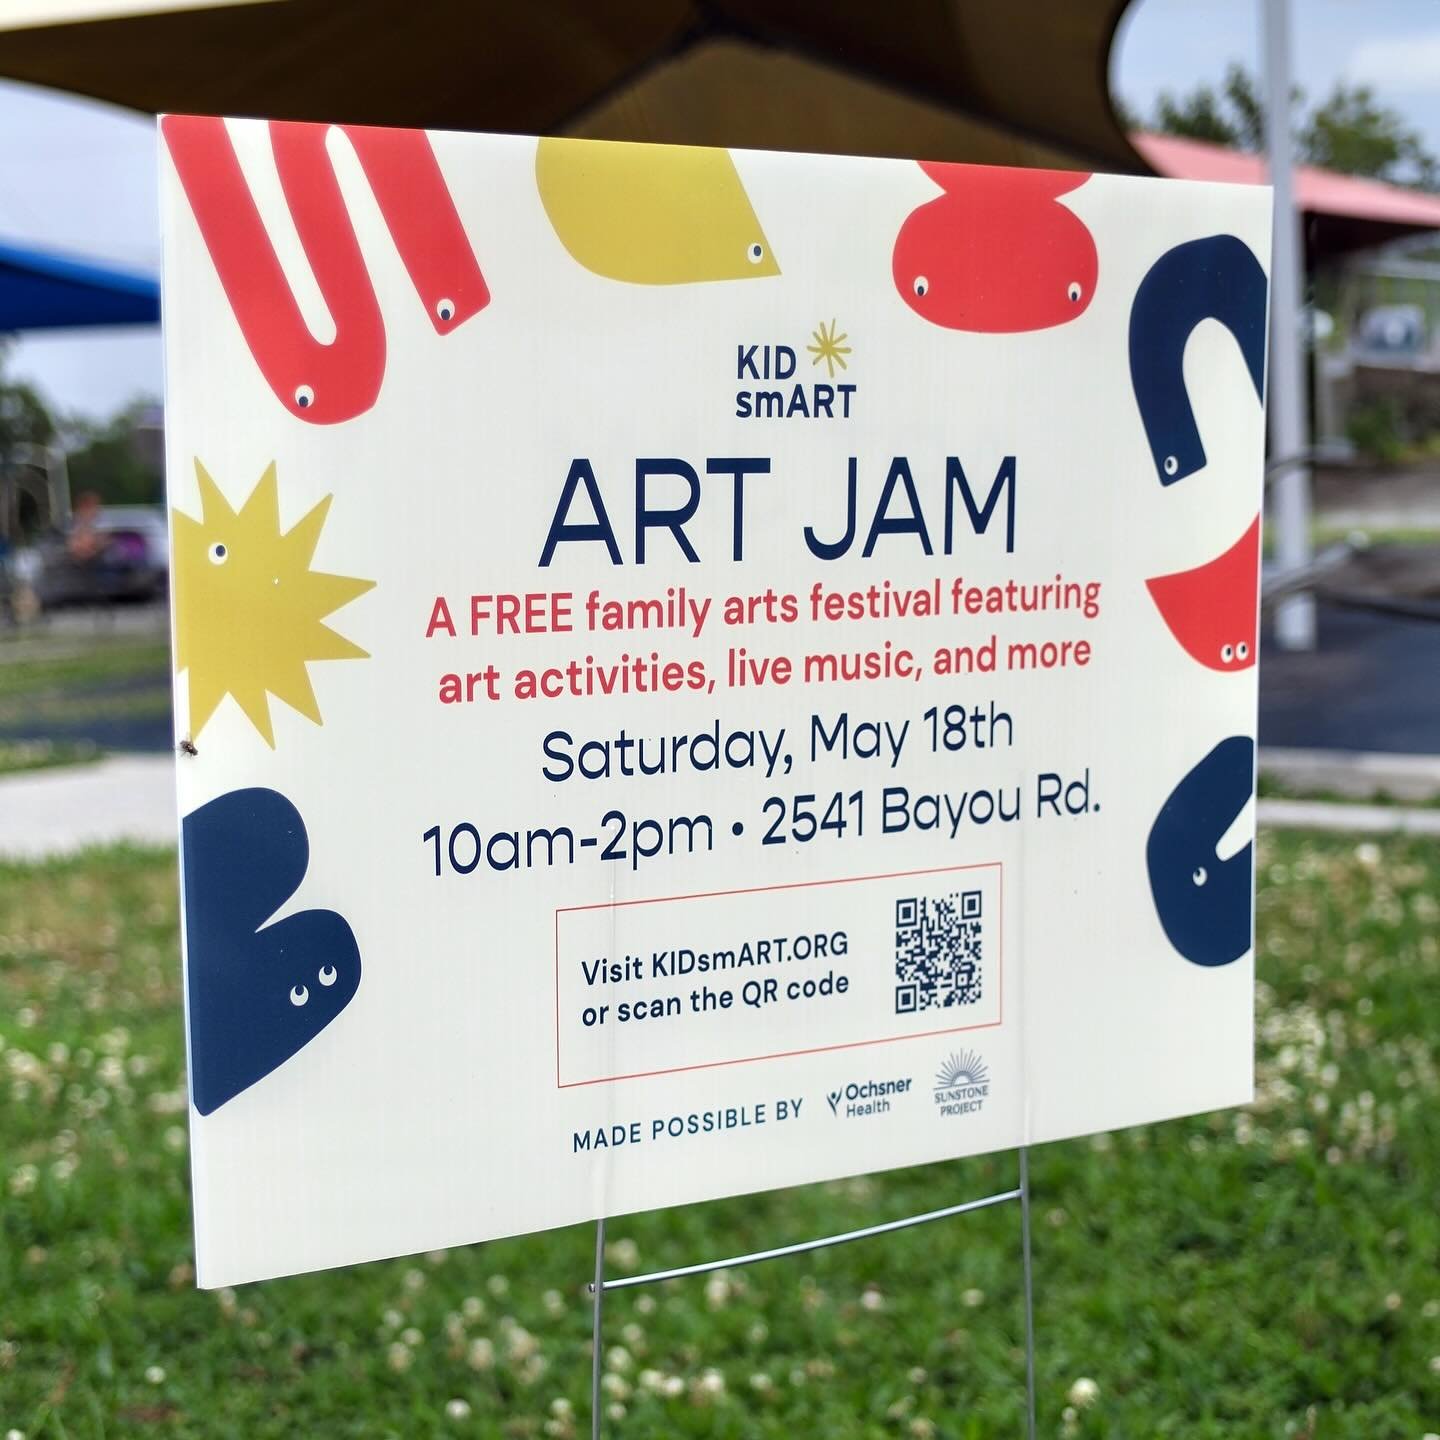 ART JAM is next Saturday! Will we see you there?